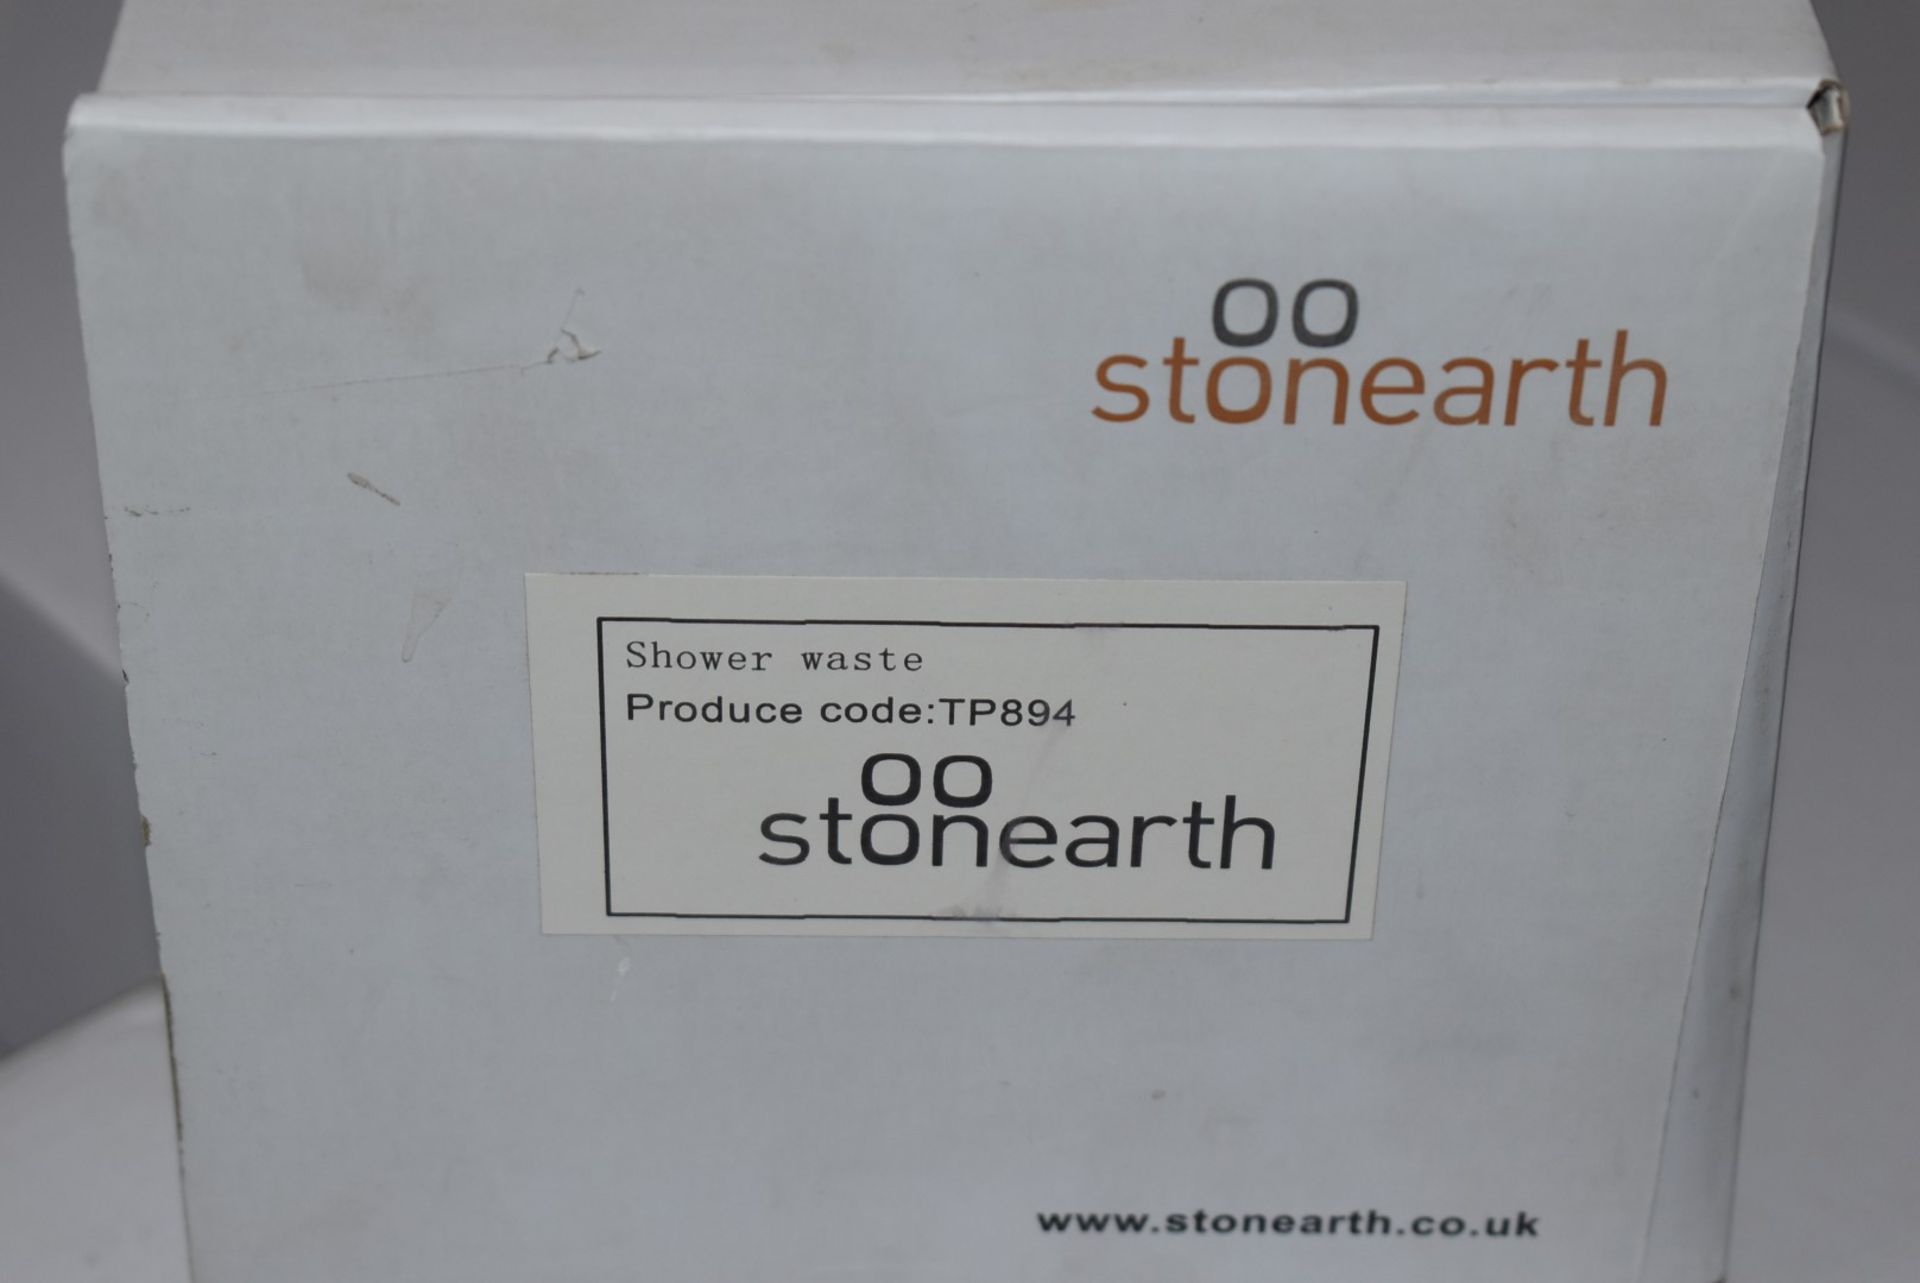 1 x Stonearth 90mm Shower Waste Kit With Stainless Steel Cover - Brand New & Boxed - RRP £99 - - Image 4 of 8